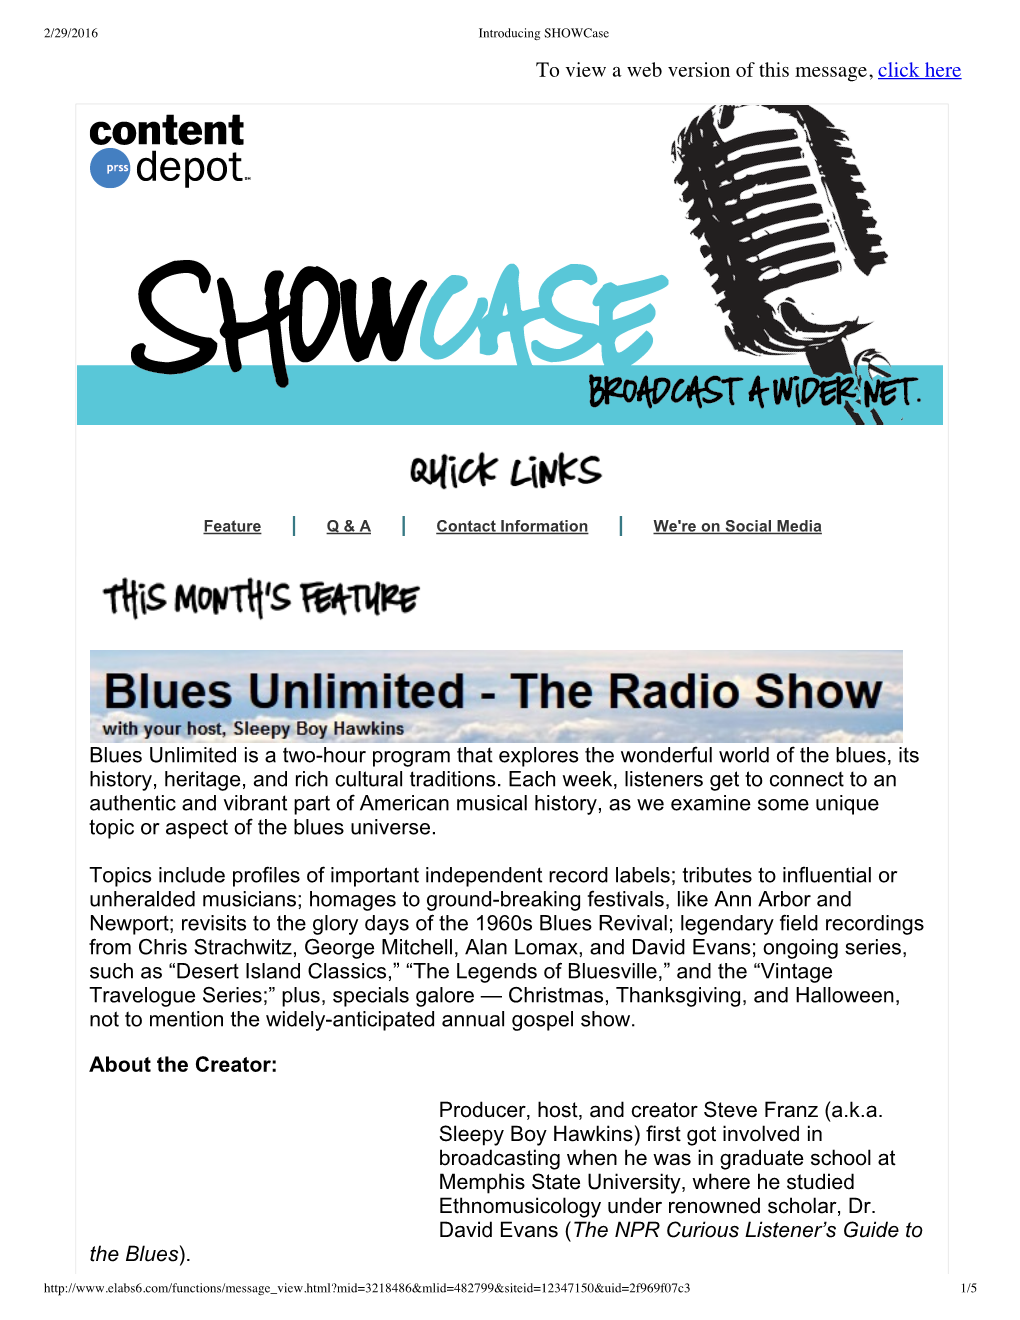 Blues Unlimited Is a Two­Hour Program That Explores the Wonderful World of the Blues, Its History, Heritage, and Rich Cultural Traditions